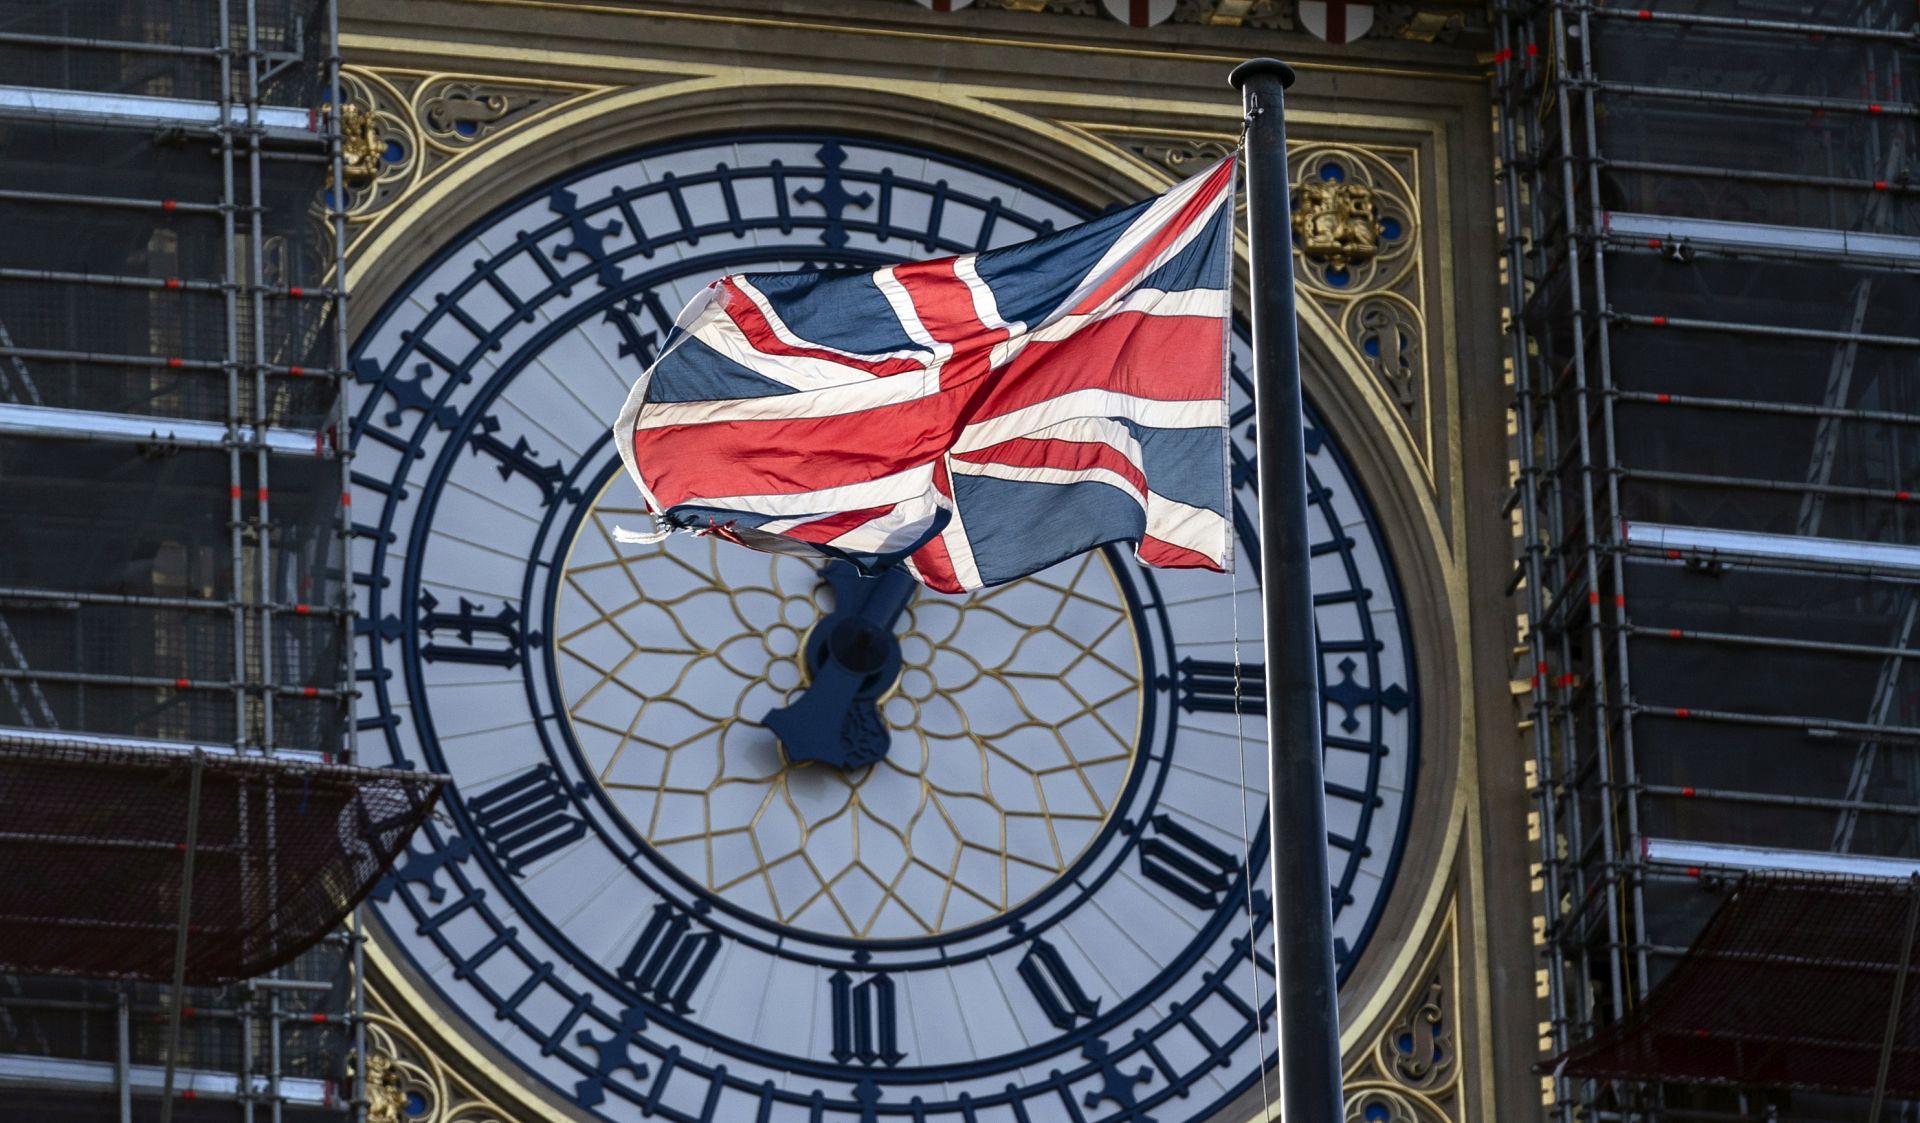 epa08130397 A view on the clock face of 'Big Ben' in Central London, Britain, 15 January 2020. Brexit campaigners have lead lobbied for the bell inside the tower to chime, for the first time since restoration work has taken place, on 31 January 2020 to mark the UK leaving the European Union.  EPA/WILL OLIVER